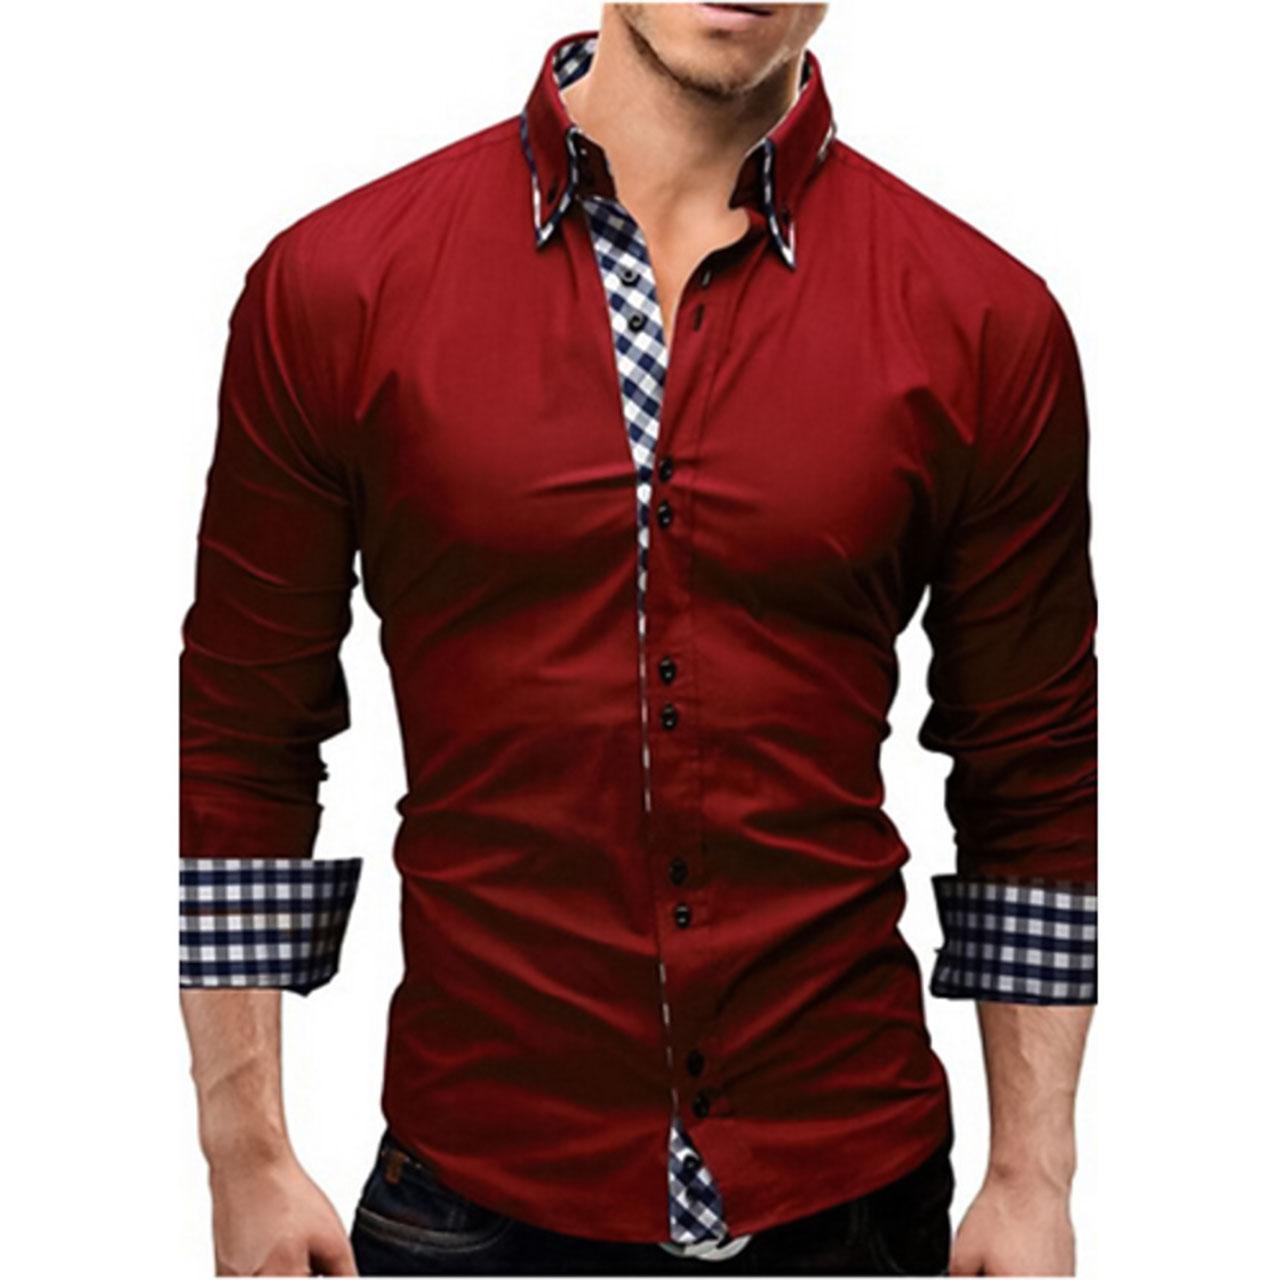 Men's Solid Business Daily Work Spread Collar Red Long Sleeve Shirt With Collar